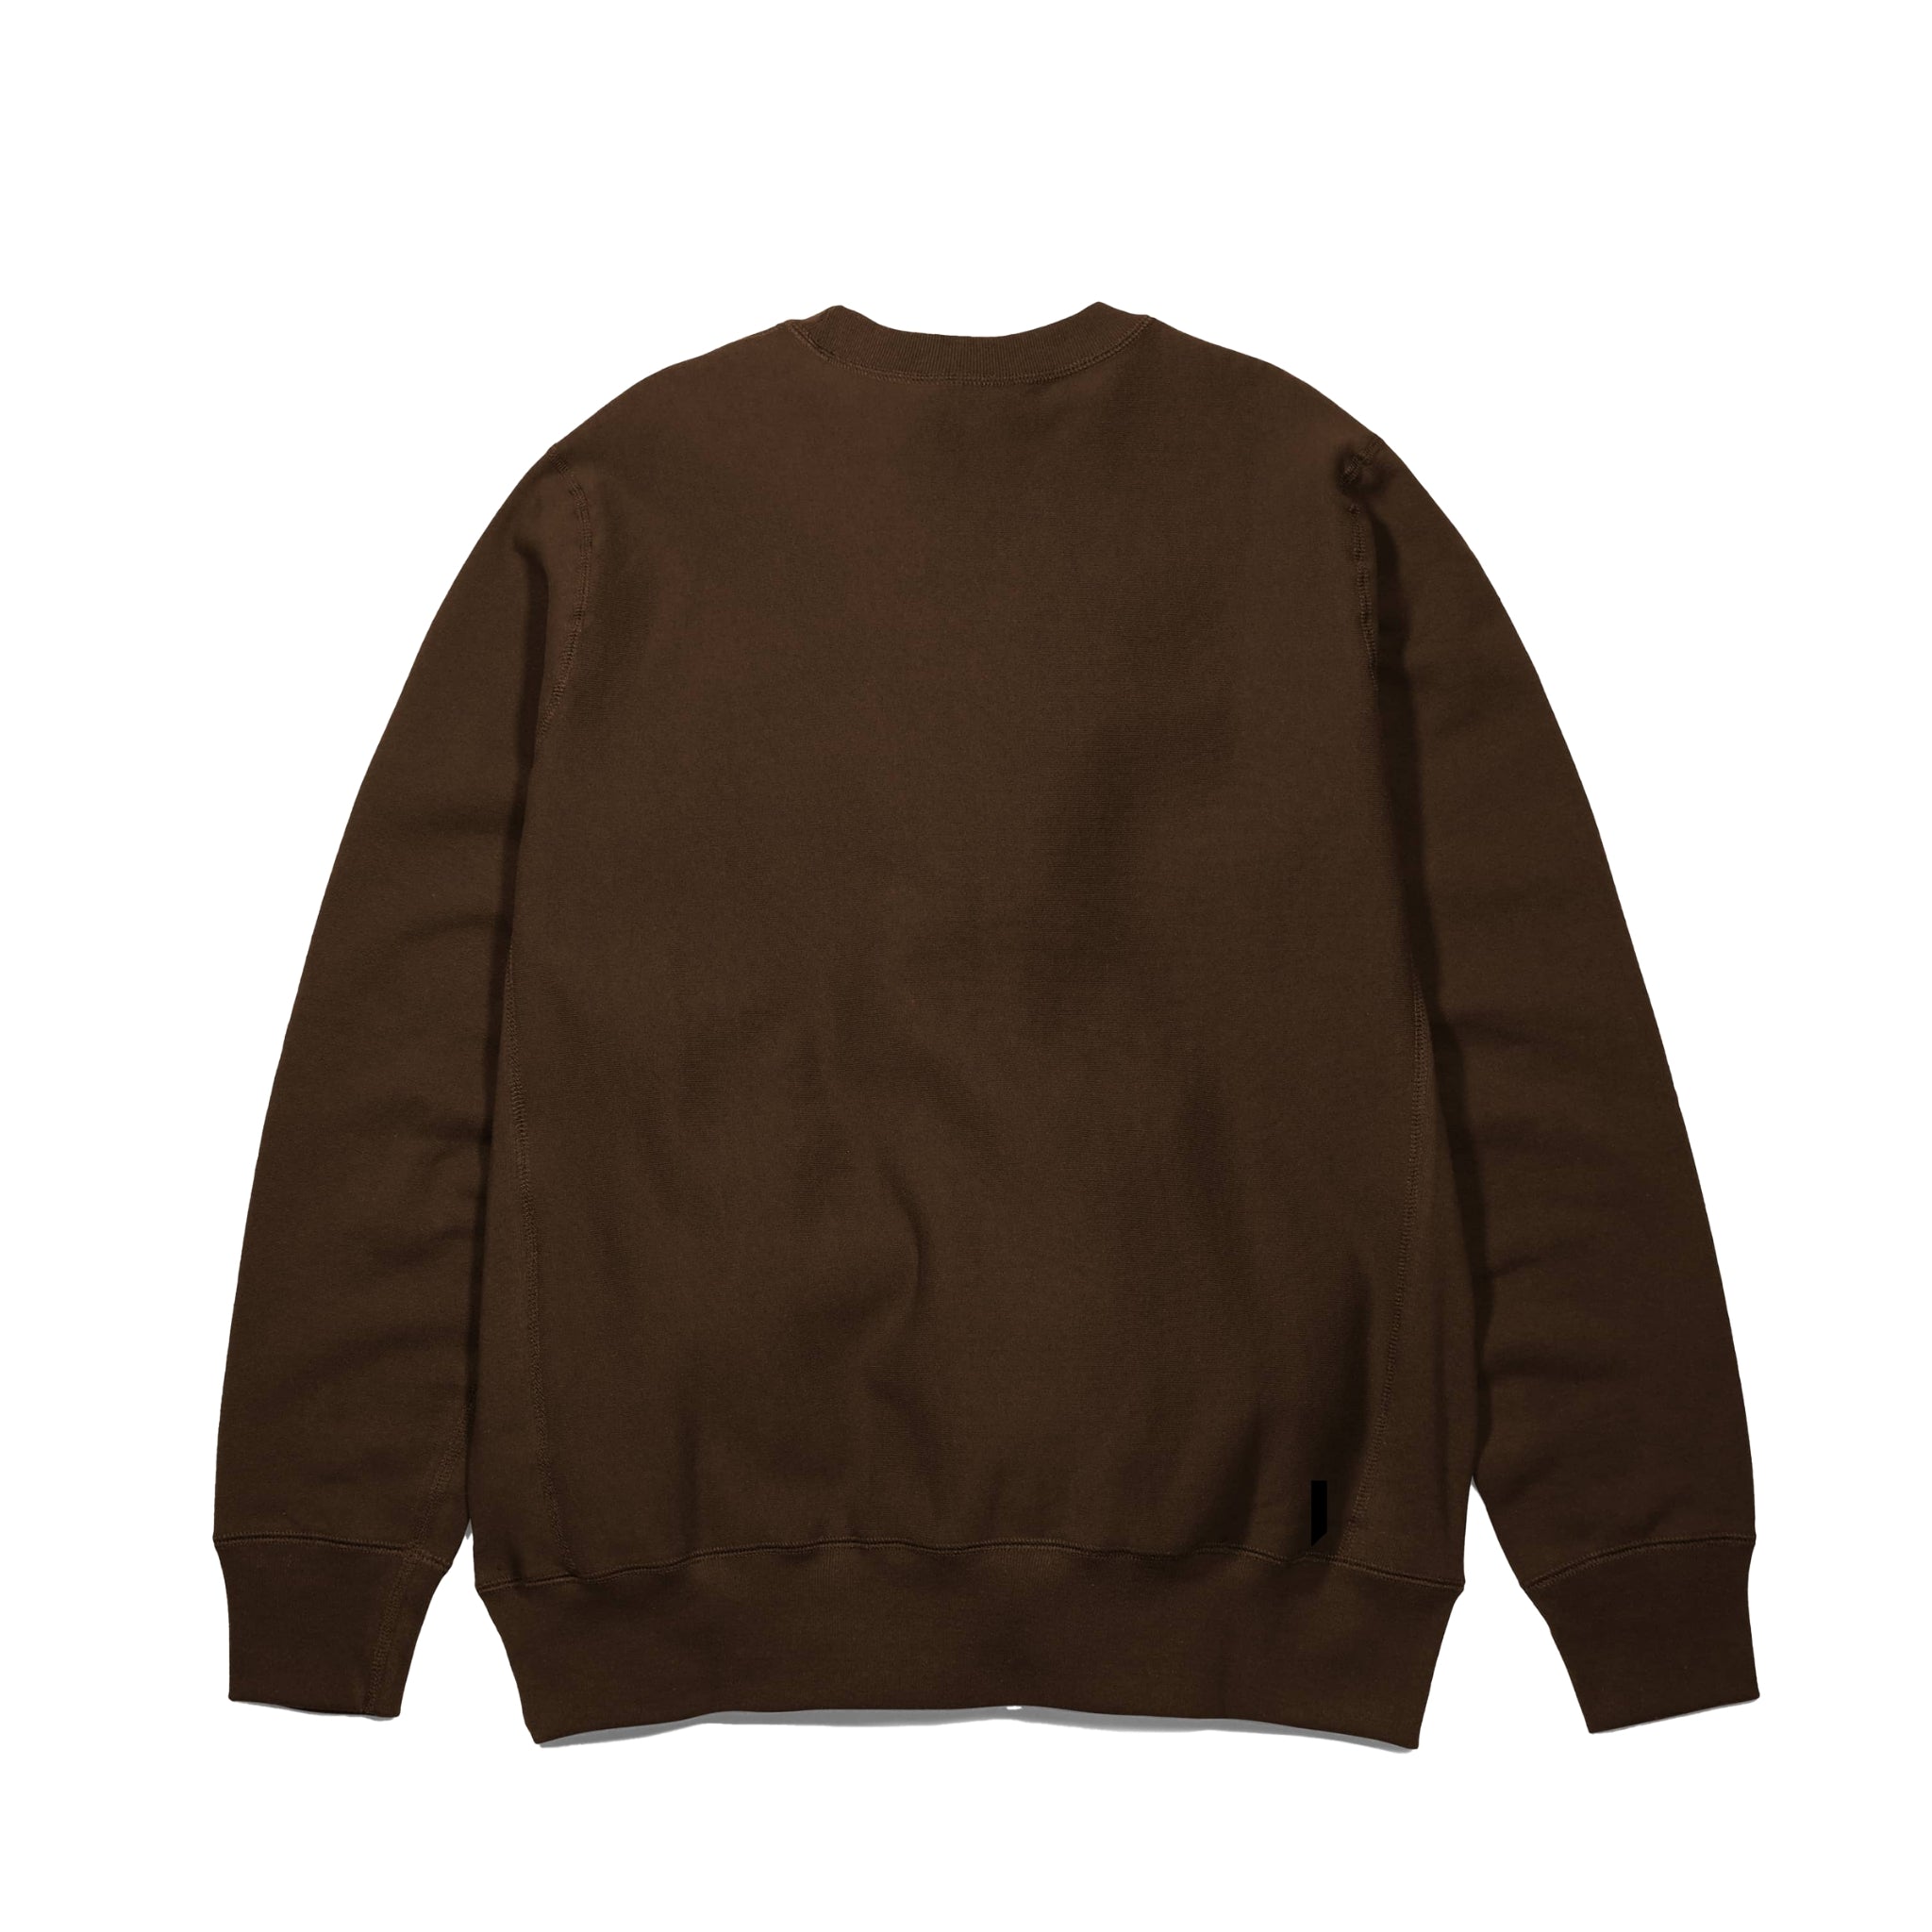 Back view of brown heavyweight knit crewneck in 100% cotton